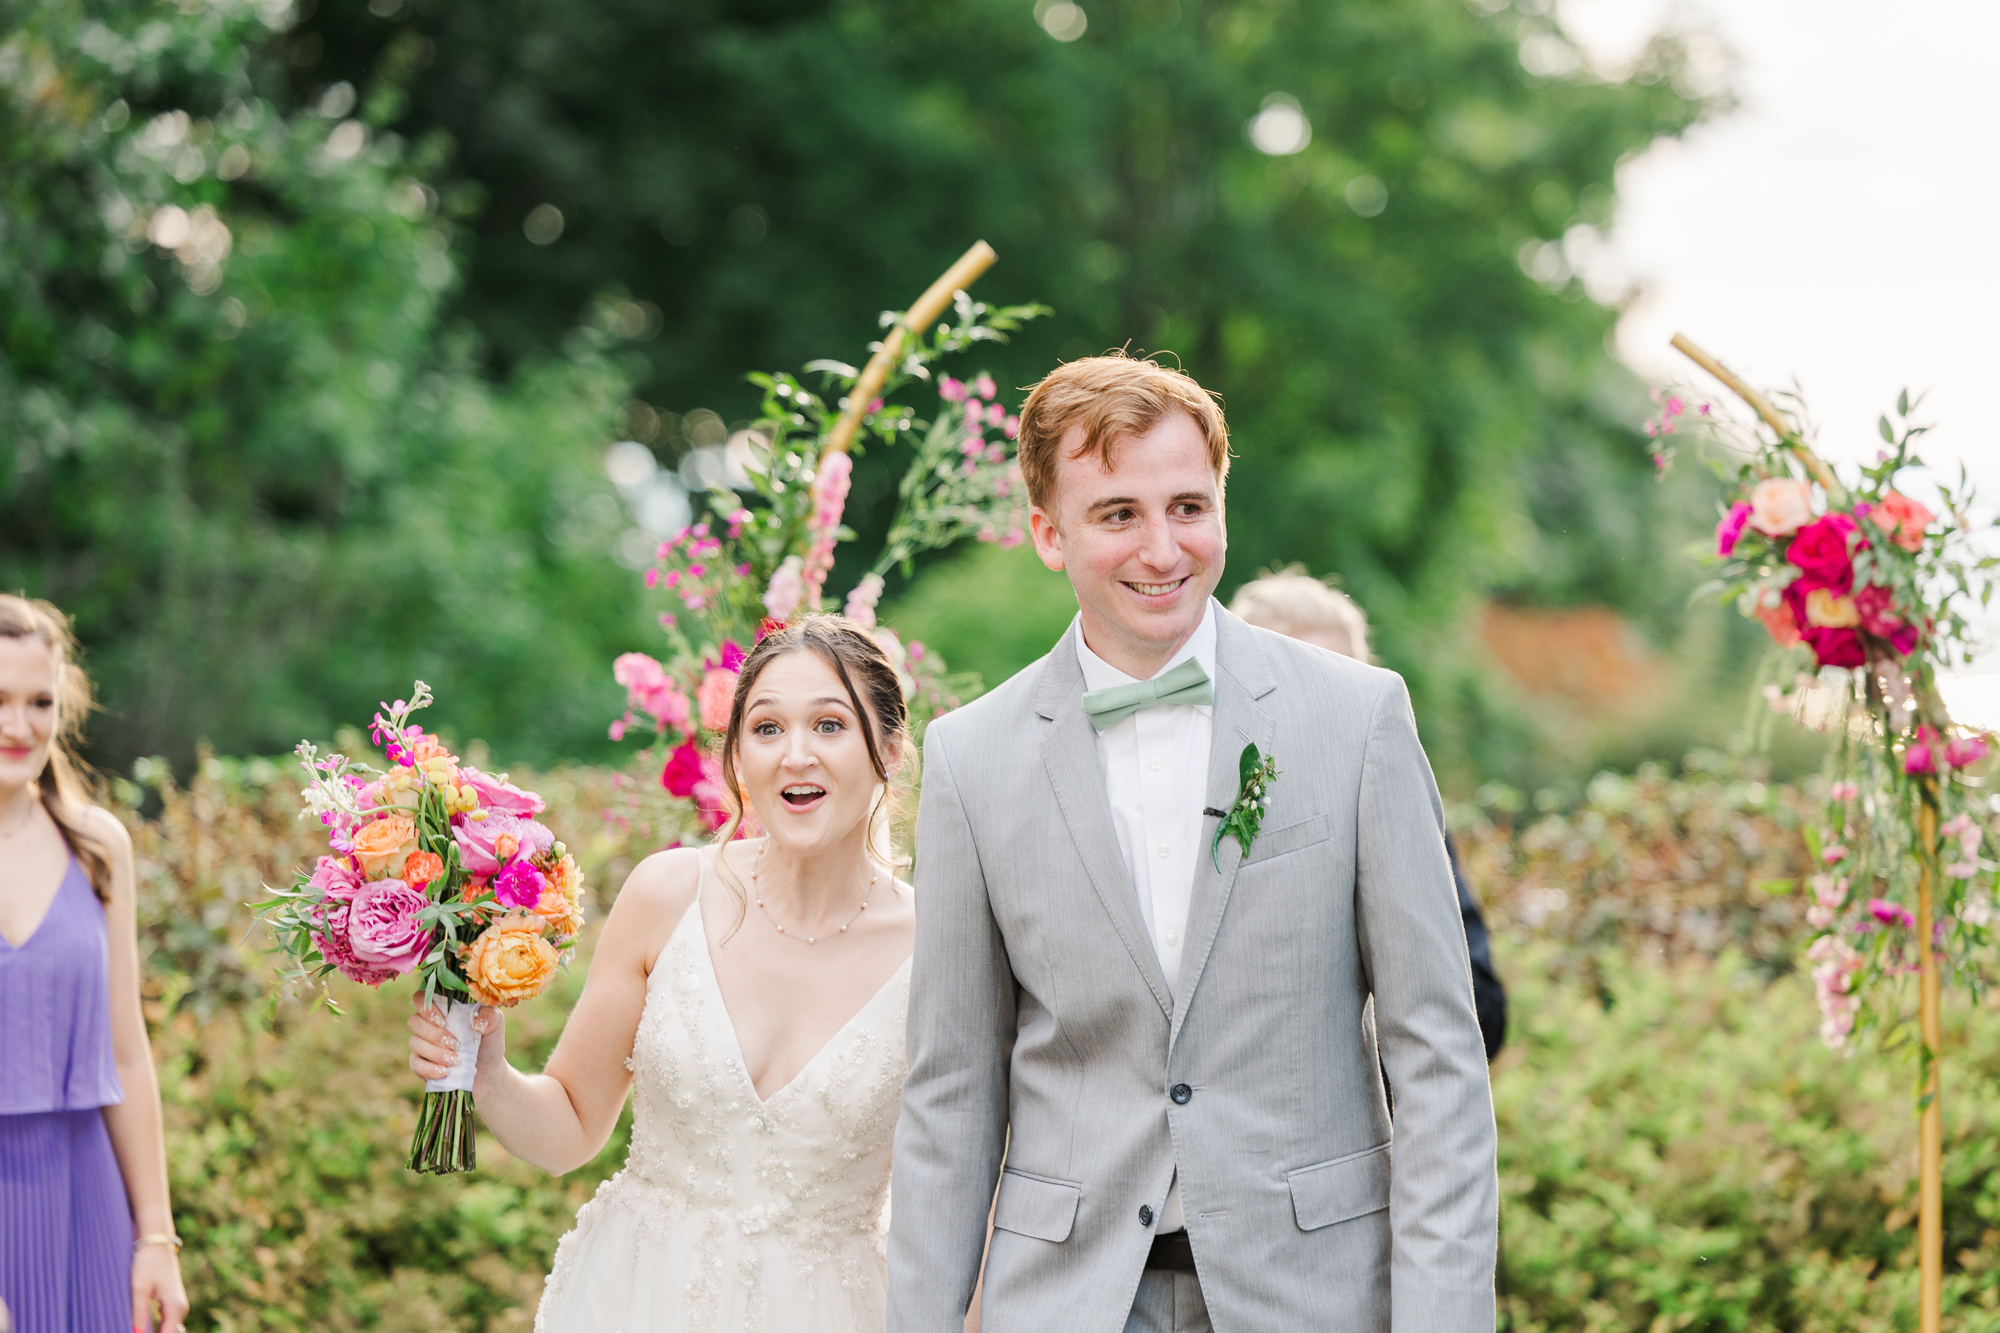 Breathtaking Wedding at Briarcliff Manor in Summertime